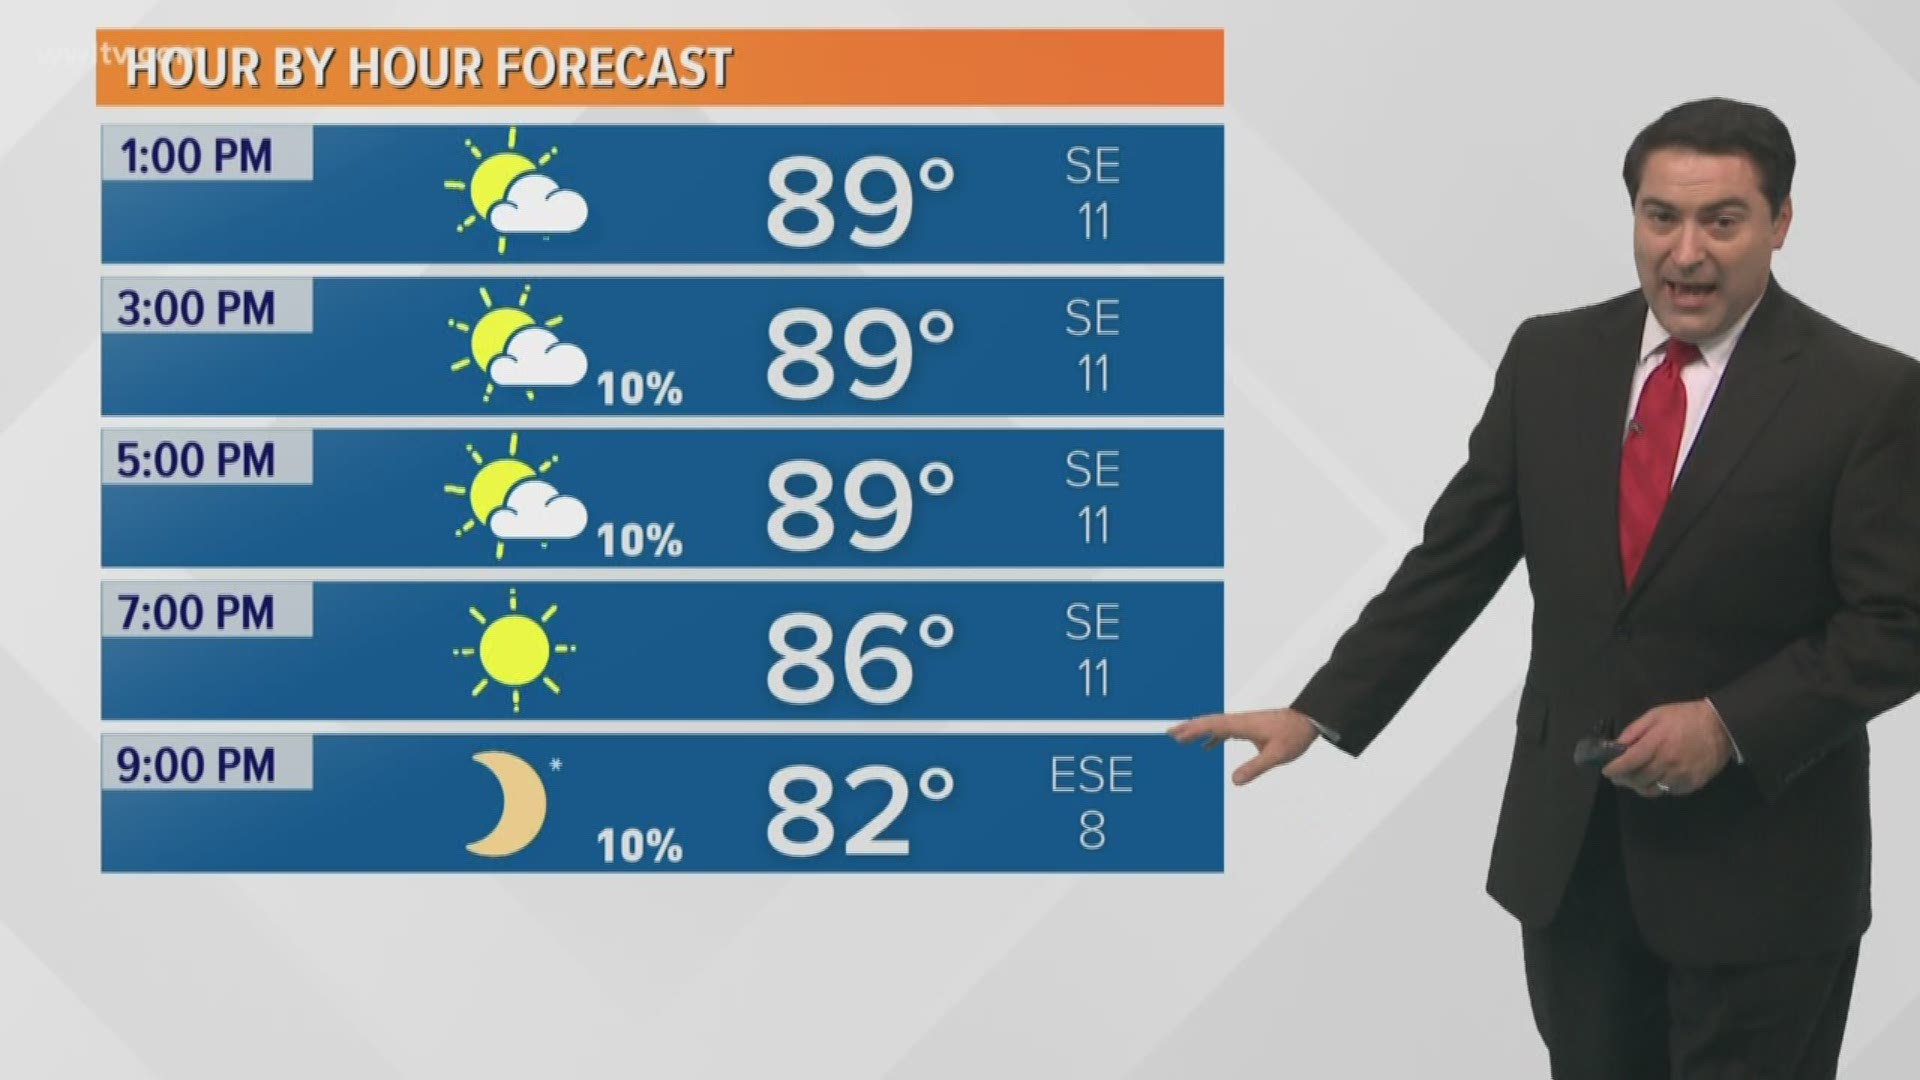 Meteorologist Dave Nussbaum says the heat and humidity continue across the New Orleans area today. It will become even hotter during the Memorial Day Weekend.